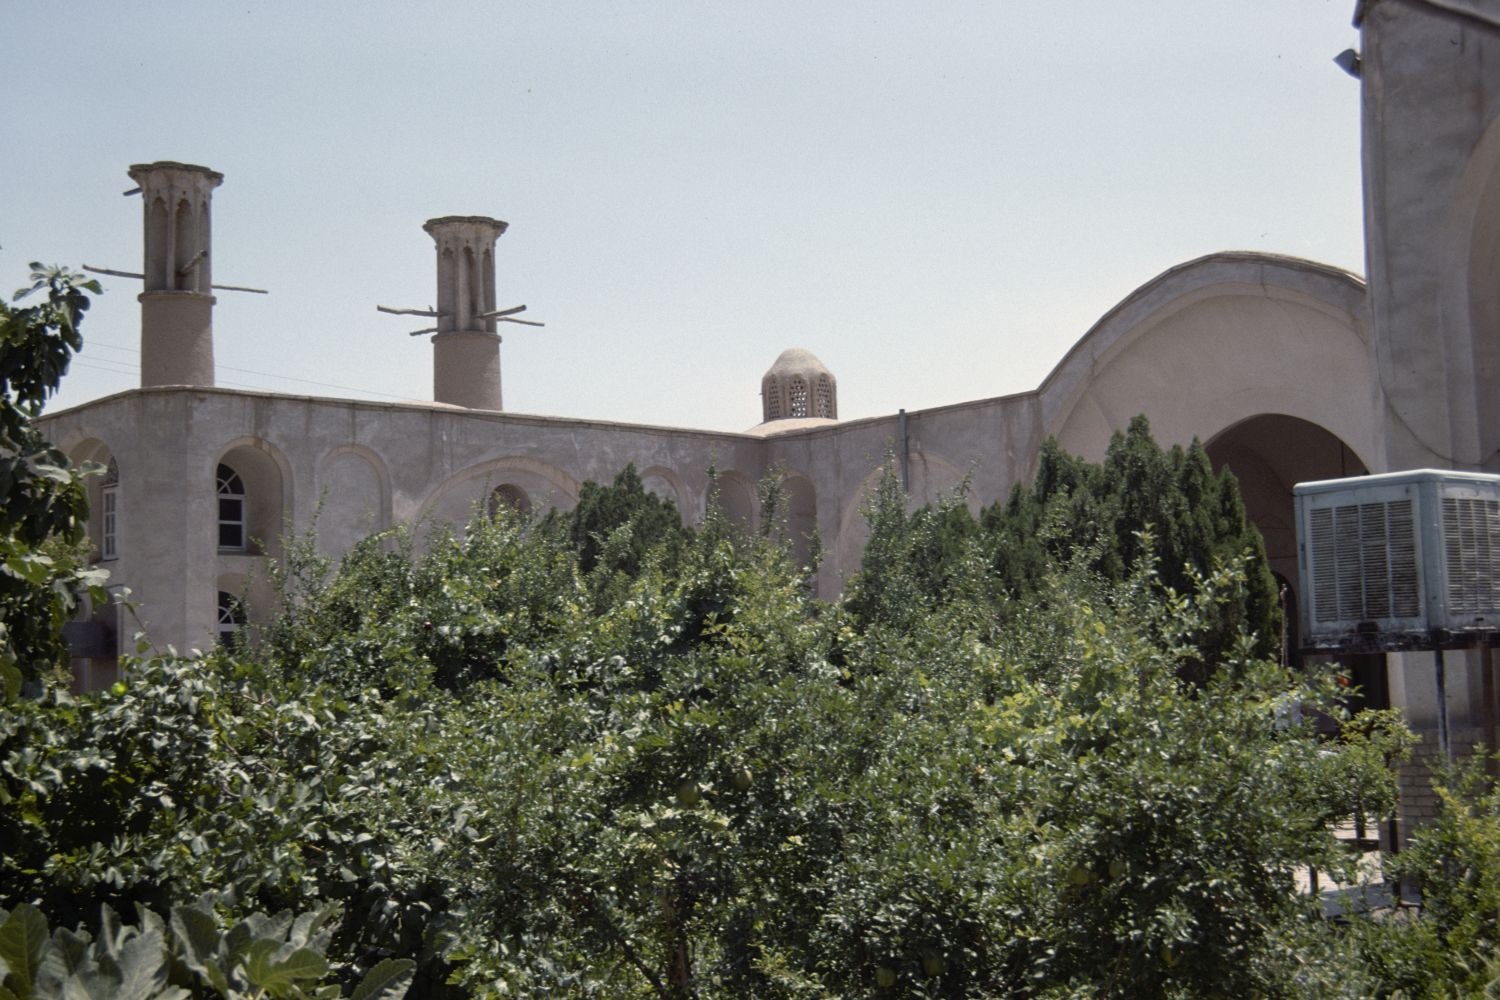 Khanah-i Yiganah - View toward house over trees in courtyard.